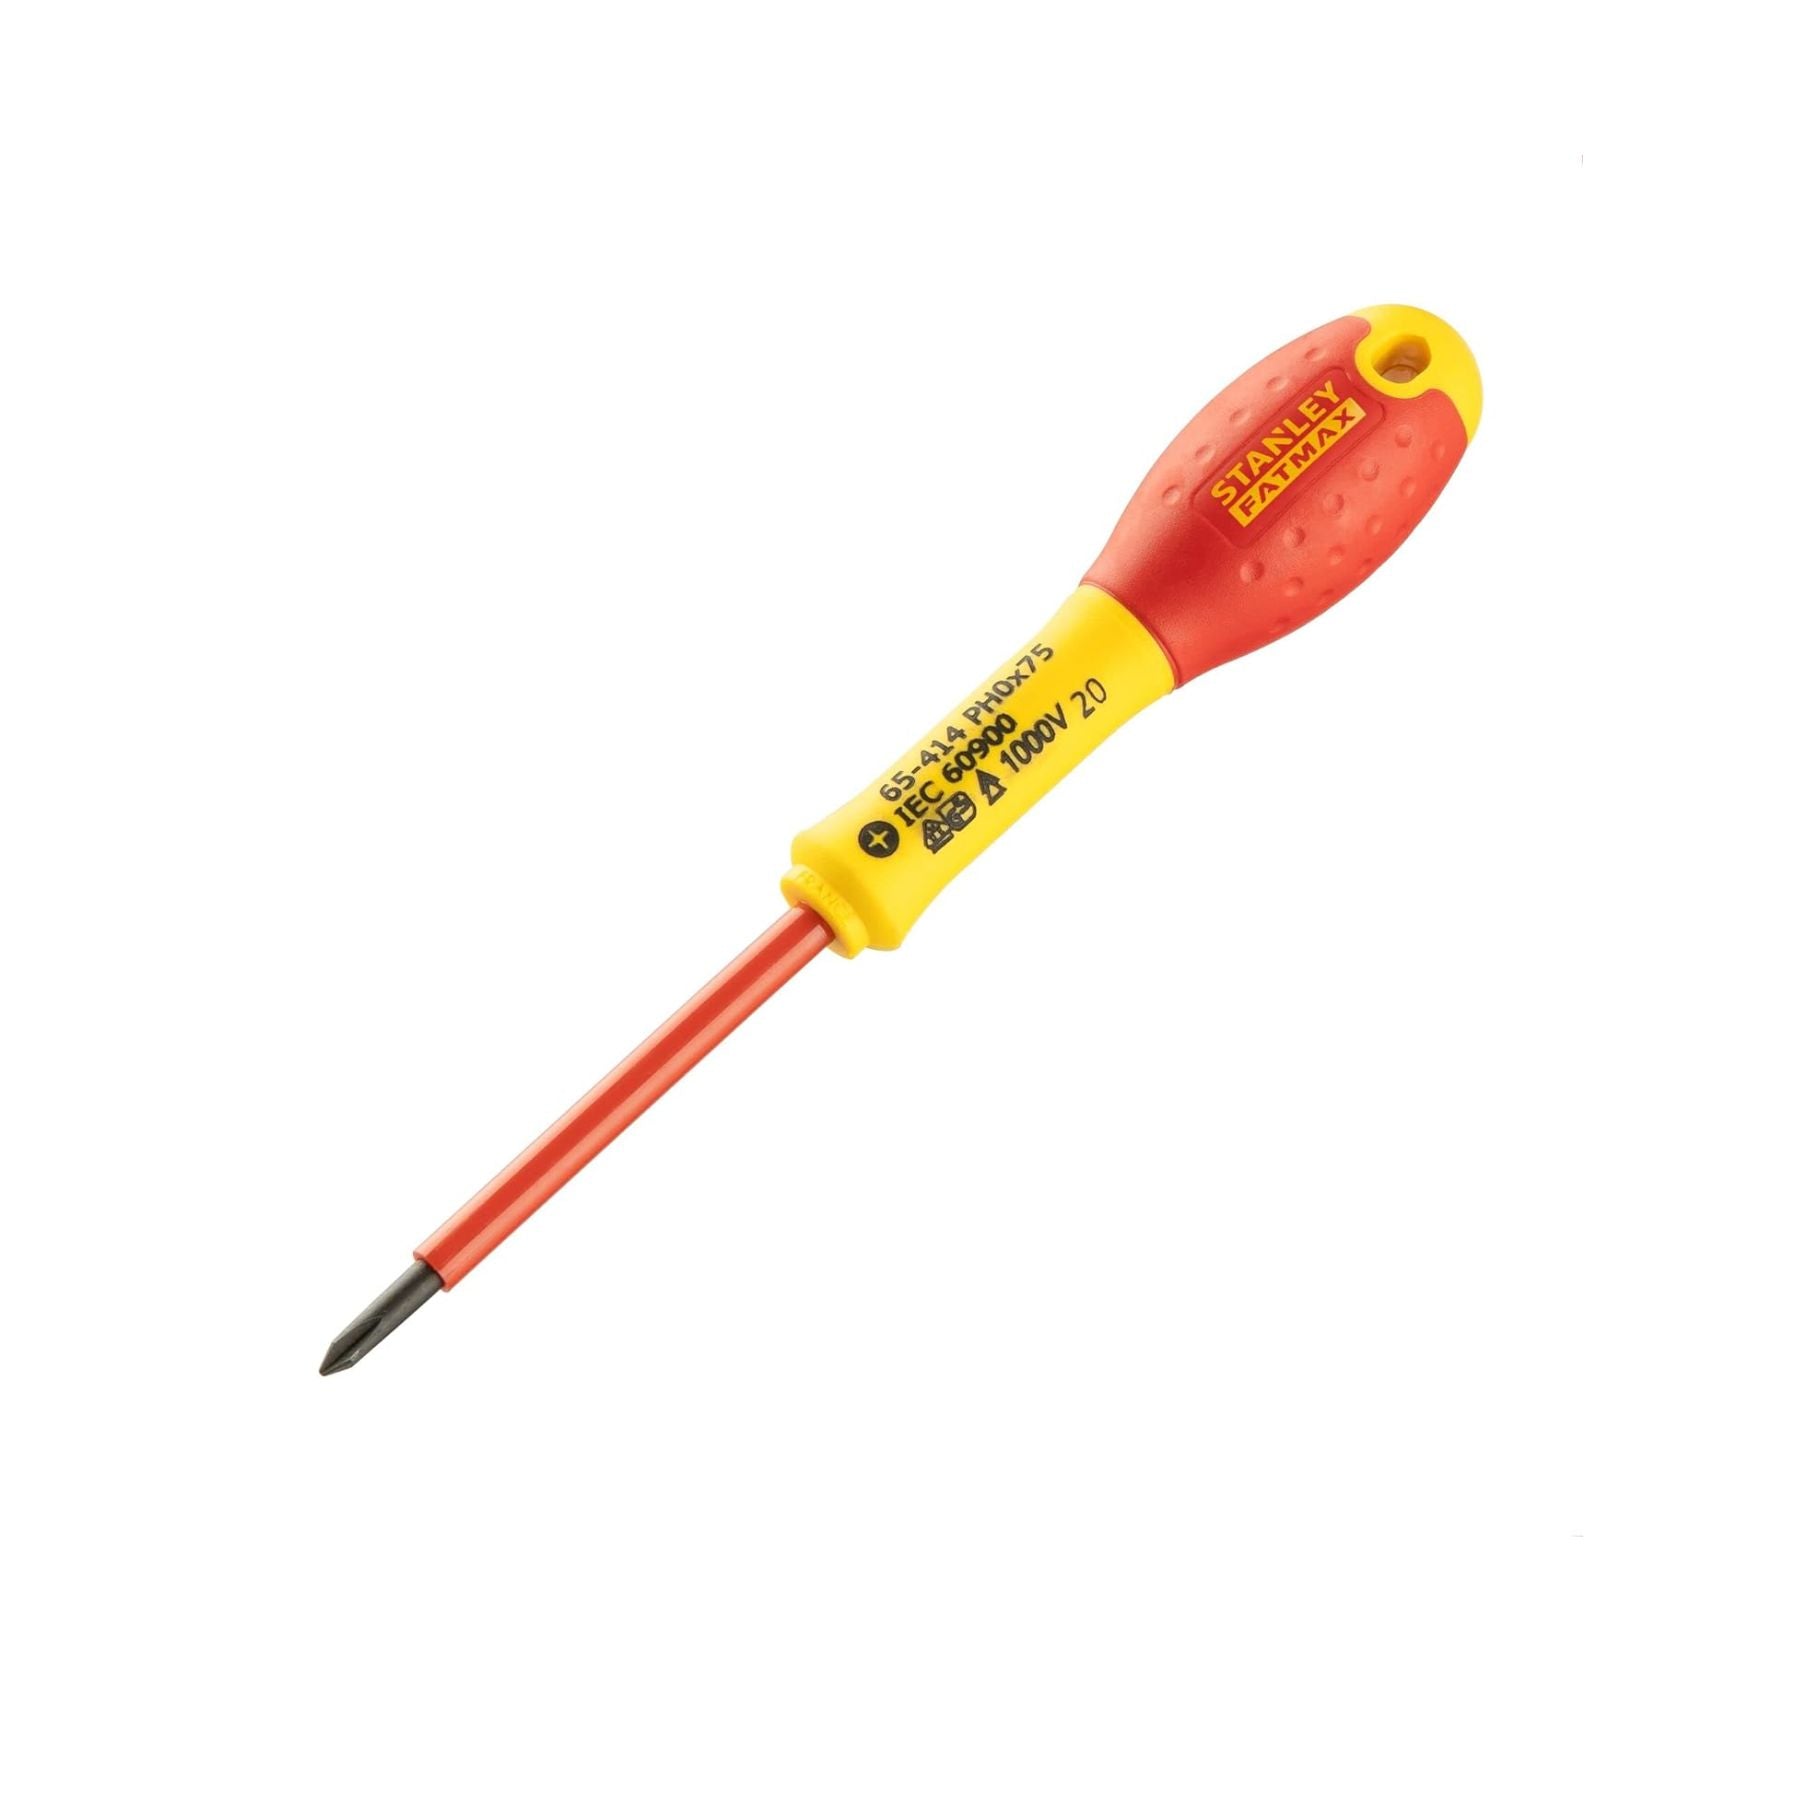 Stanley 0-65-414 VDE Screwdrivers Red/ Yellow